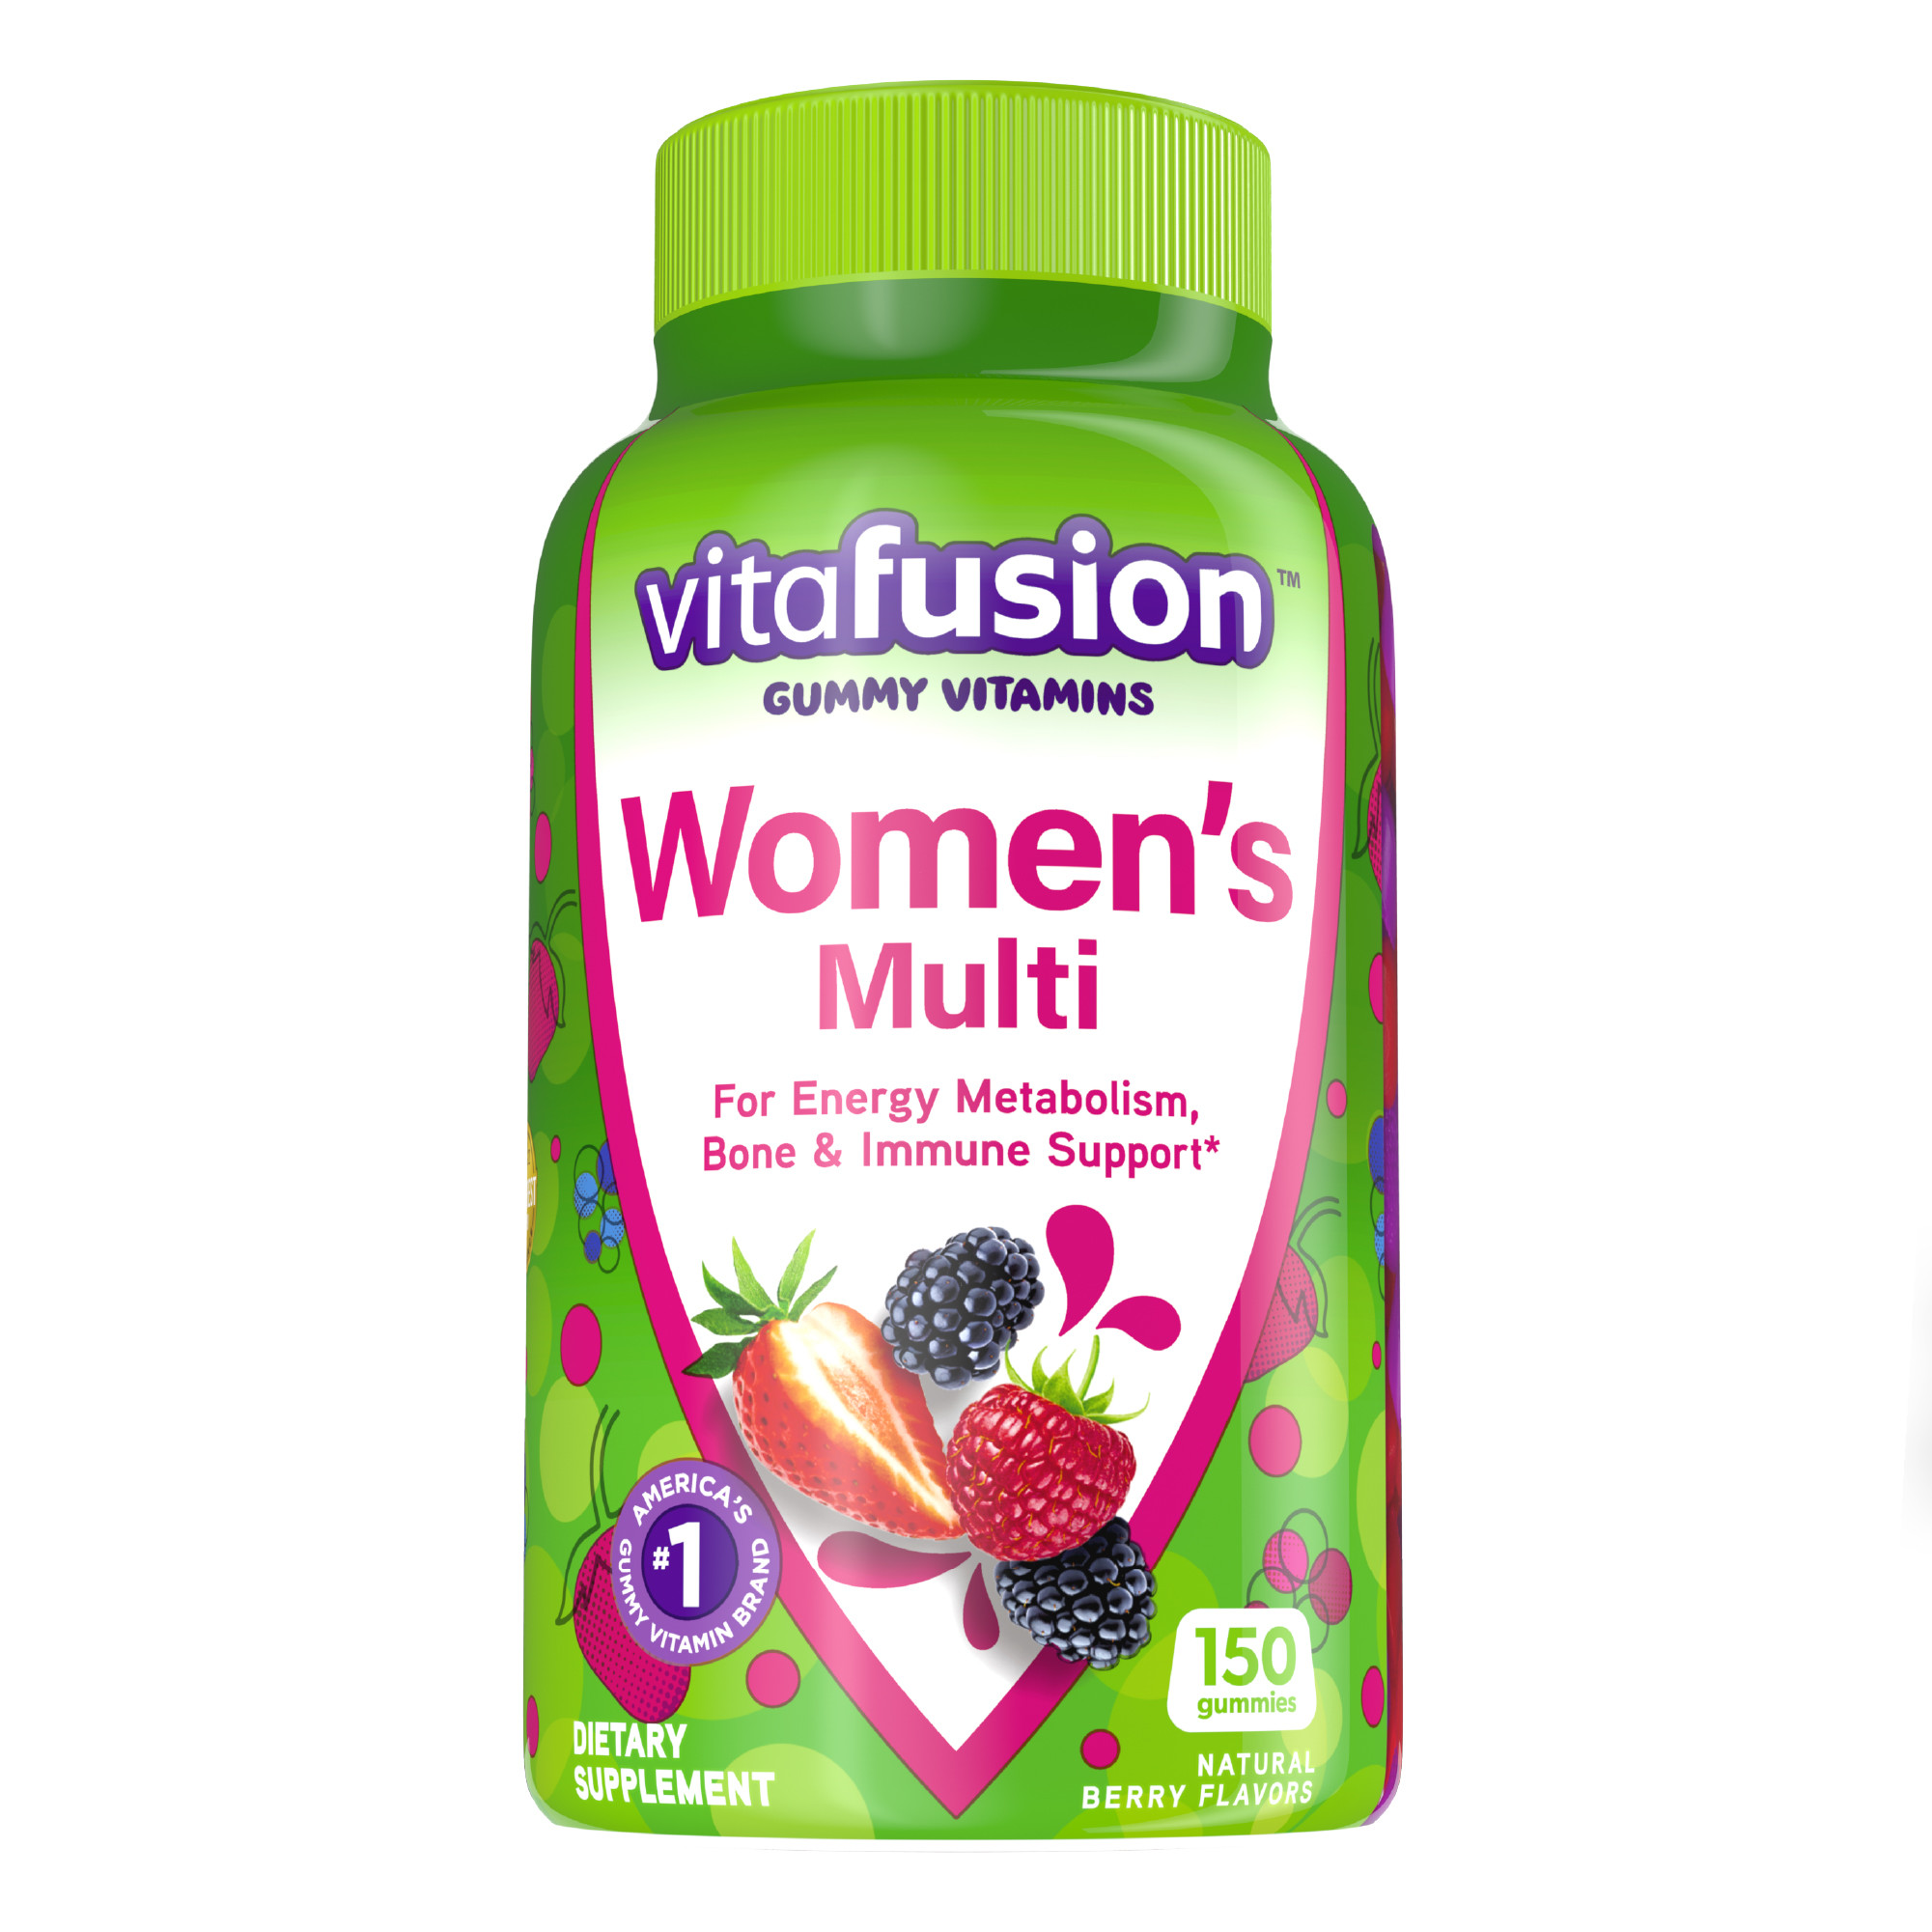 vitafusion Womens Multivitamin Gummies, Daily Vitamins for Women, Berry Flavored, 150 Count - image 1 of 9